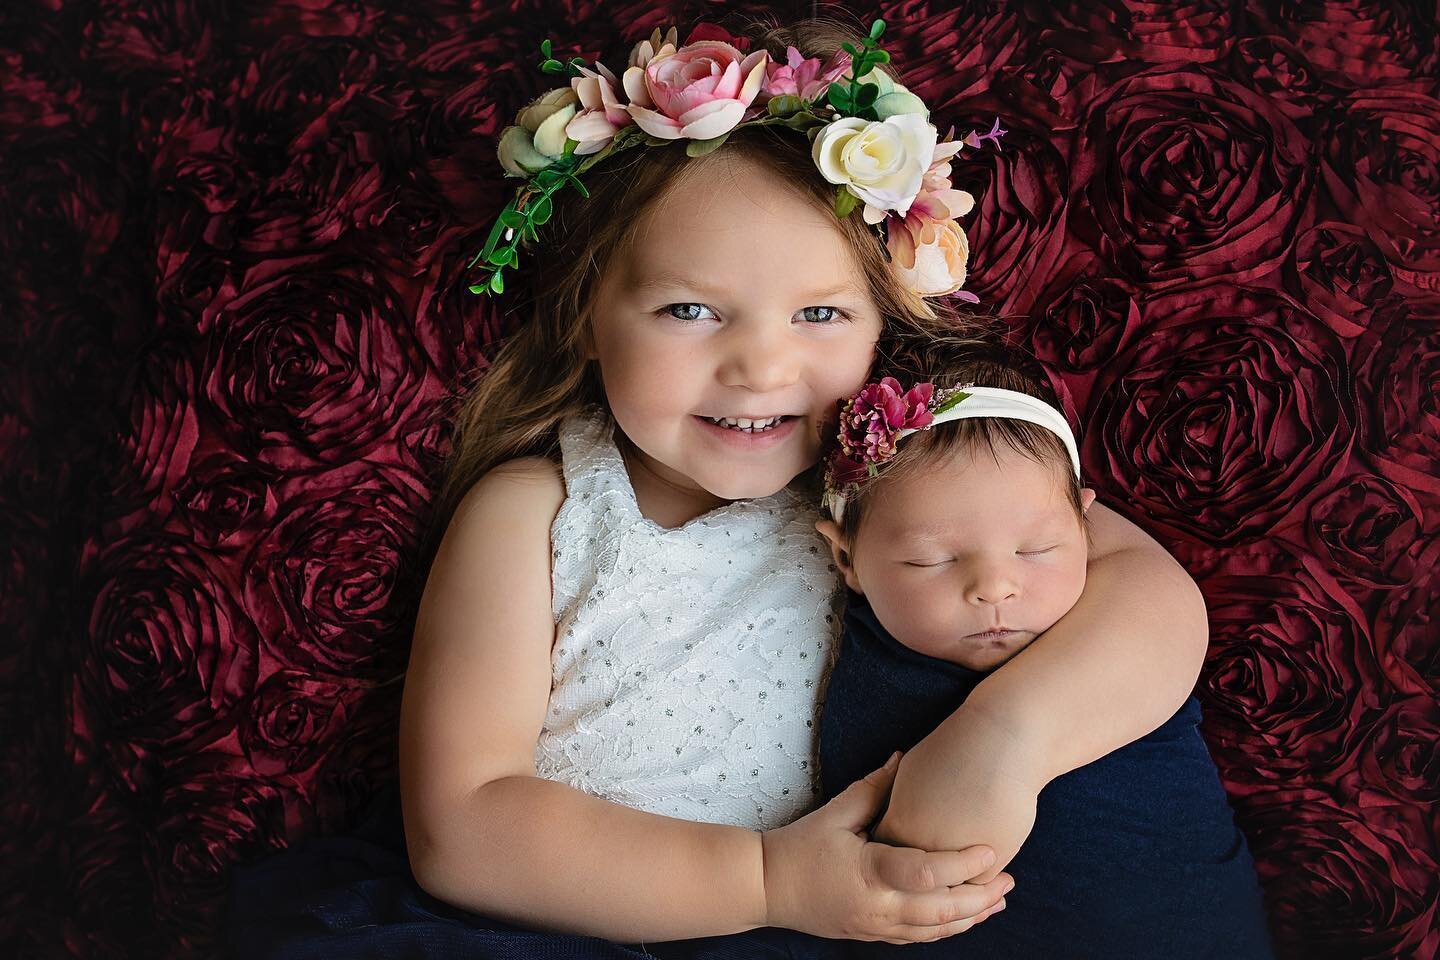 Finally on the other side (hopefully) of this norovirus, didn&rsquo;t want to forget about National Daughter&rsquo;s Day. 

These two are my life and my forever loves. I love my baby girls to the moon and back. It has been so amazing to watch their f